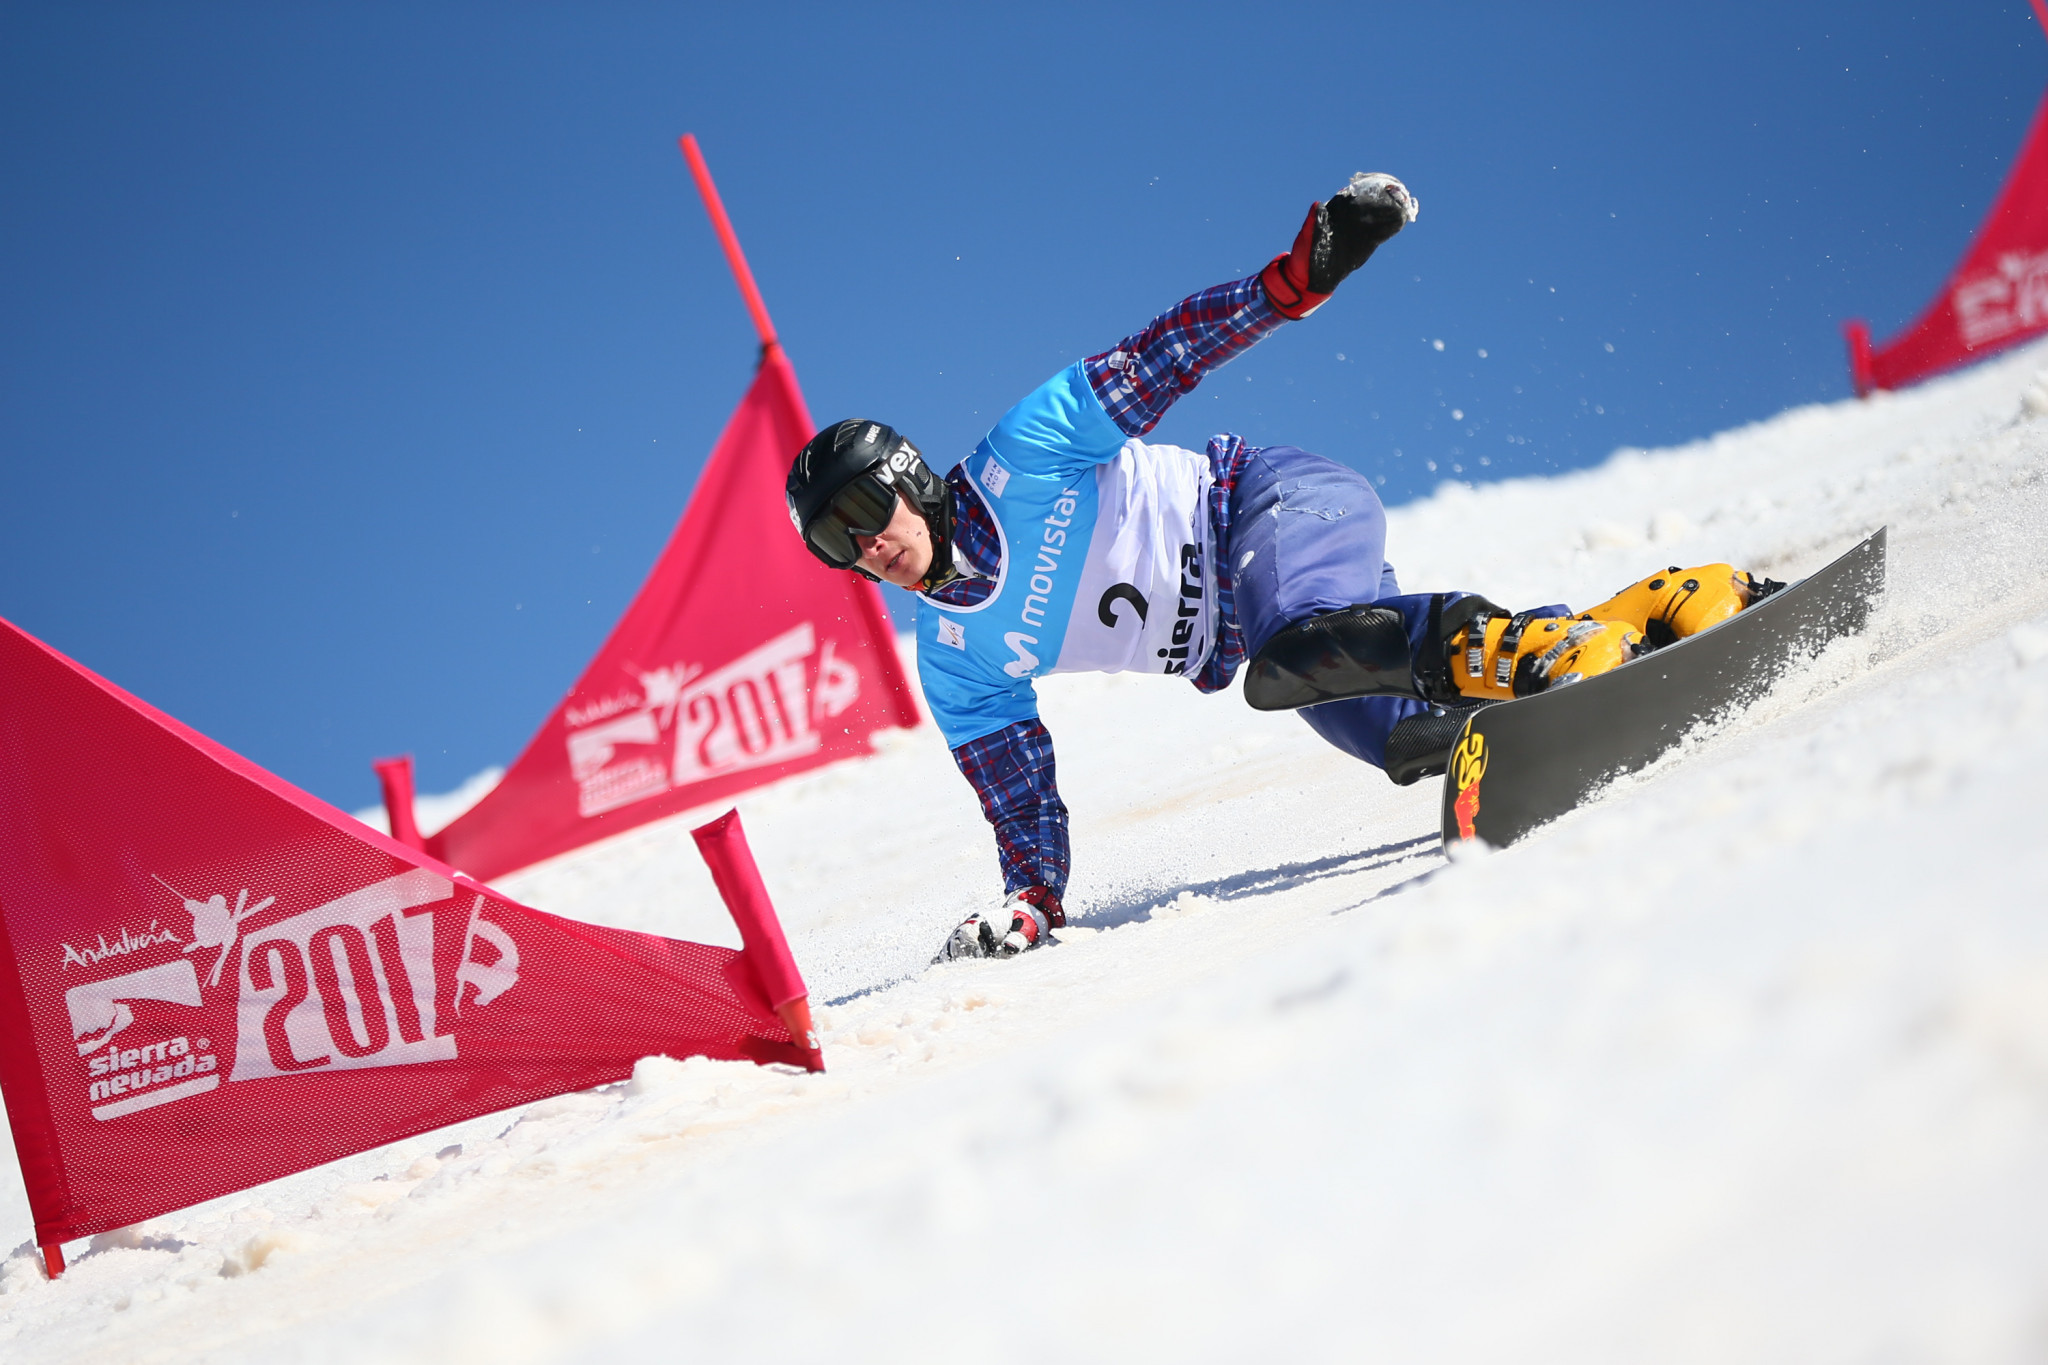 Sobolev becomes first Russian to win FIS Snowboard World Cup parallel slalom event at home venue 